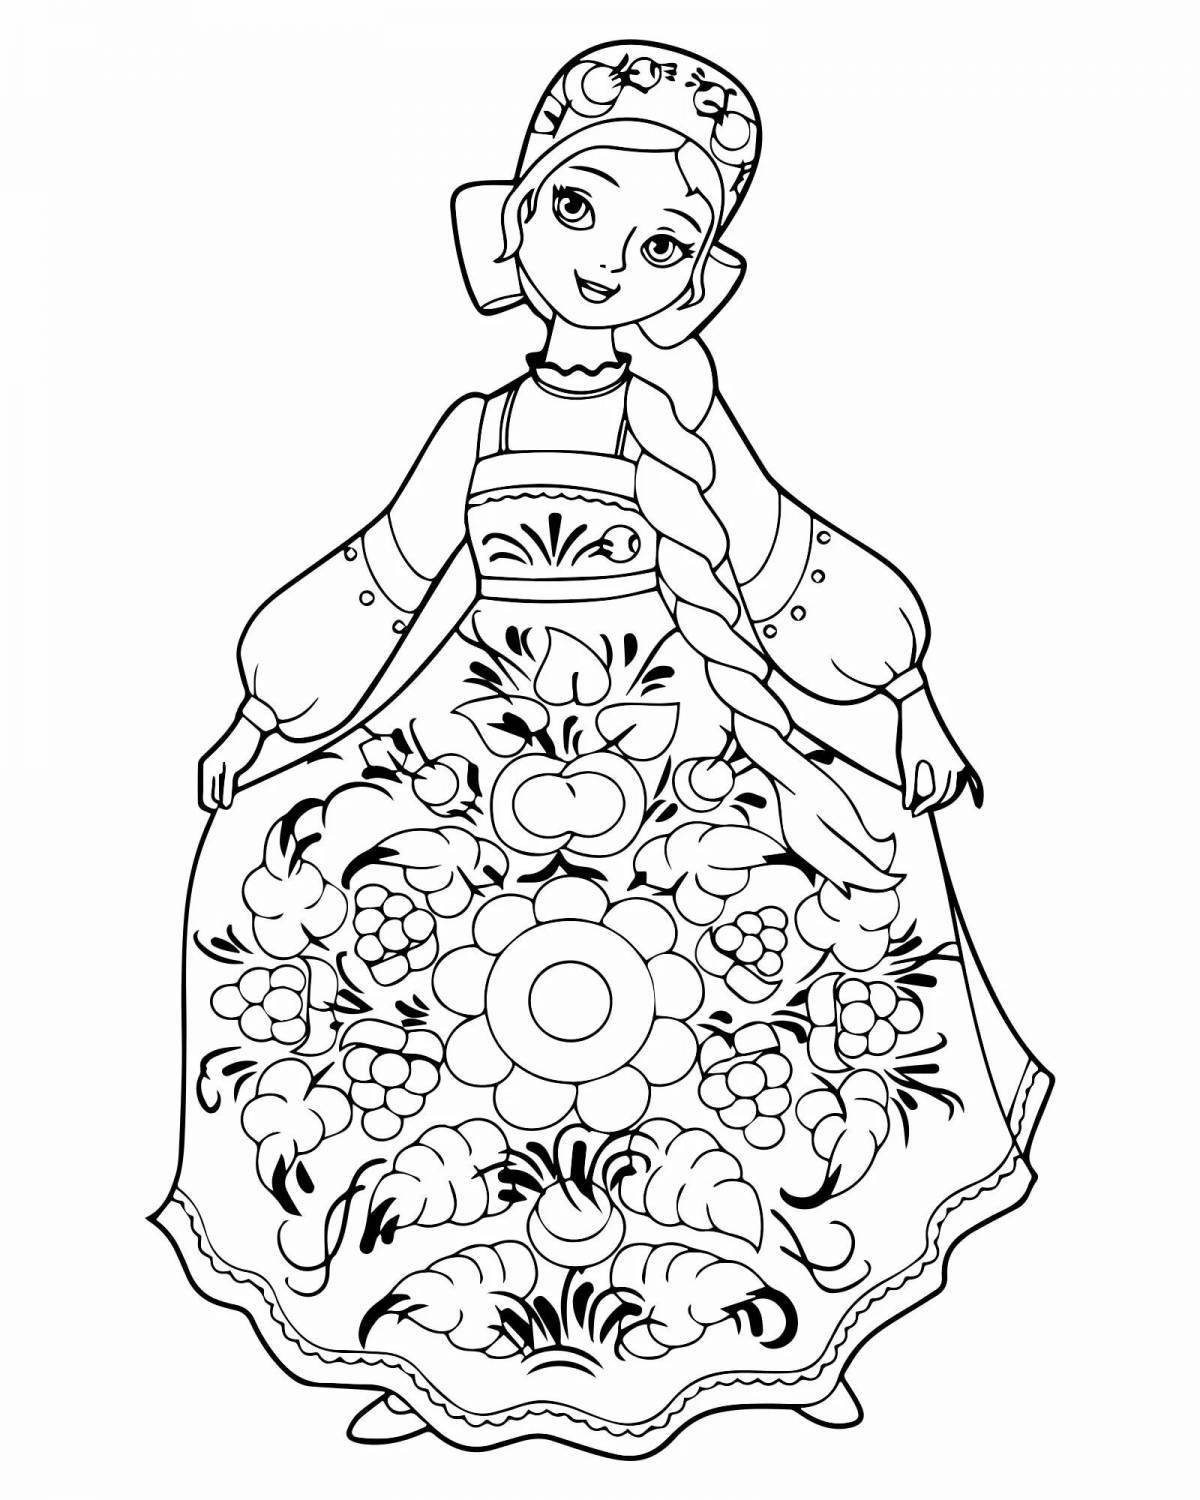 Coloring page fascinating Russian folk crafts